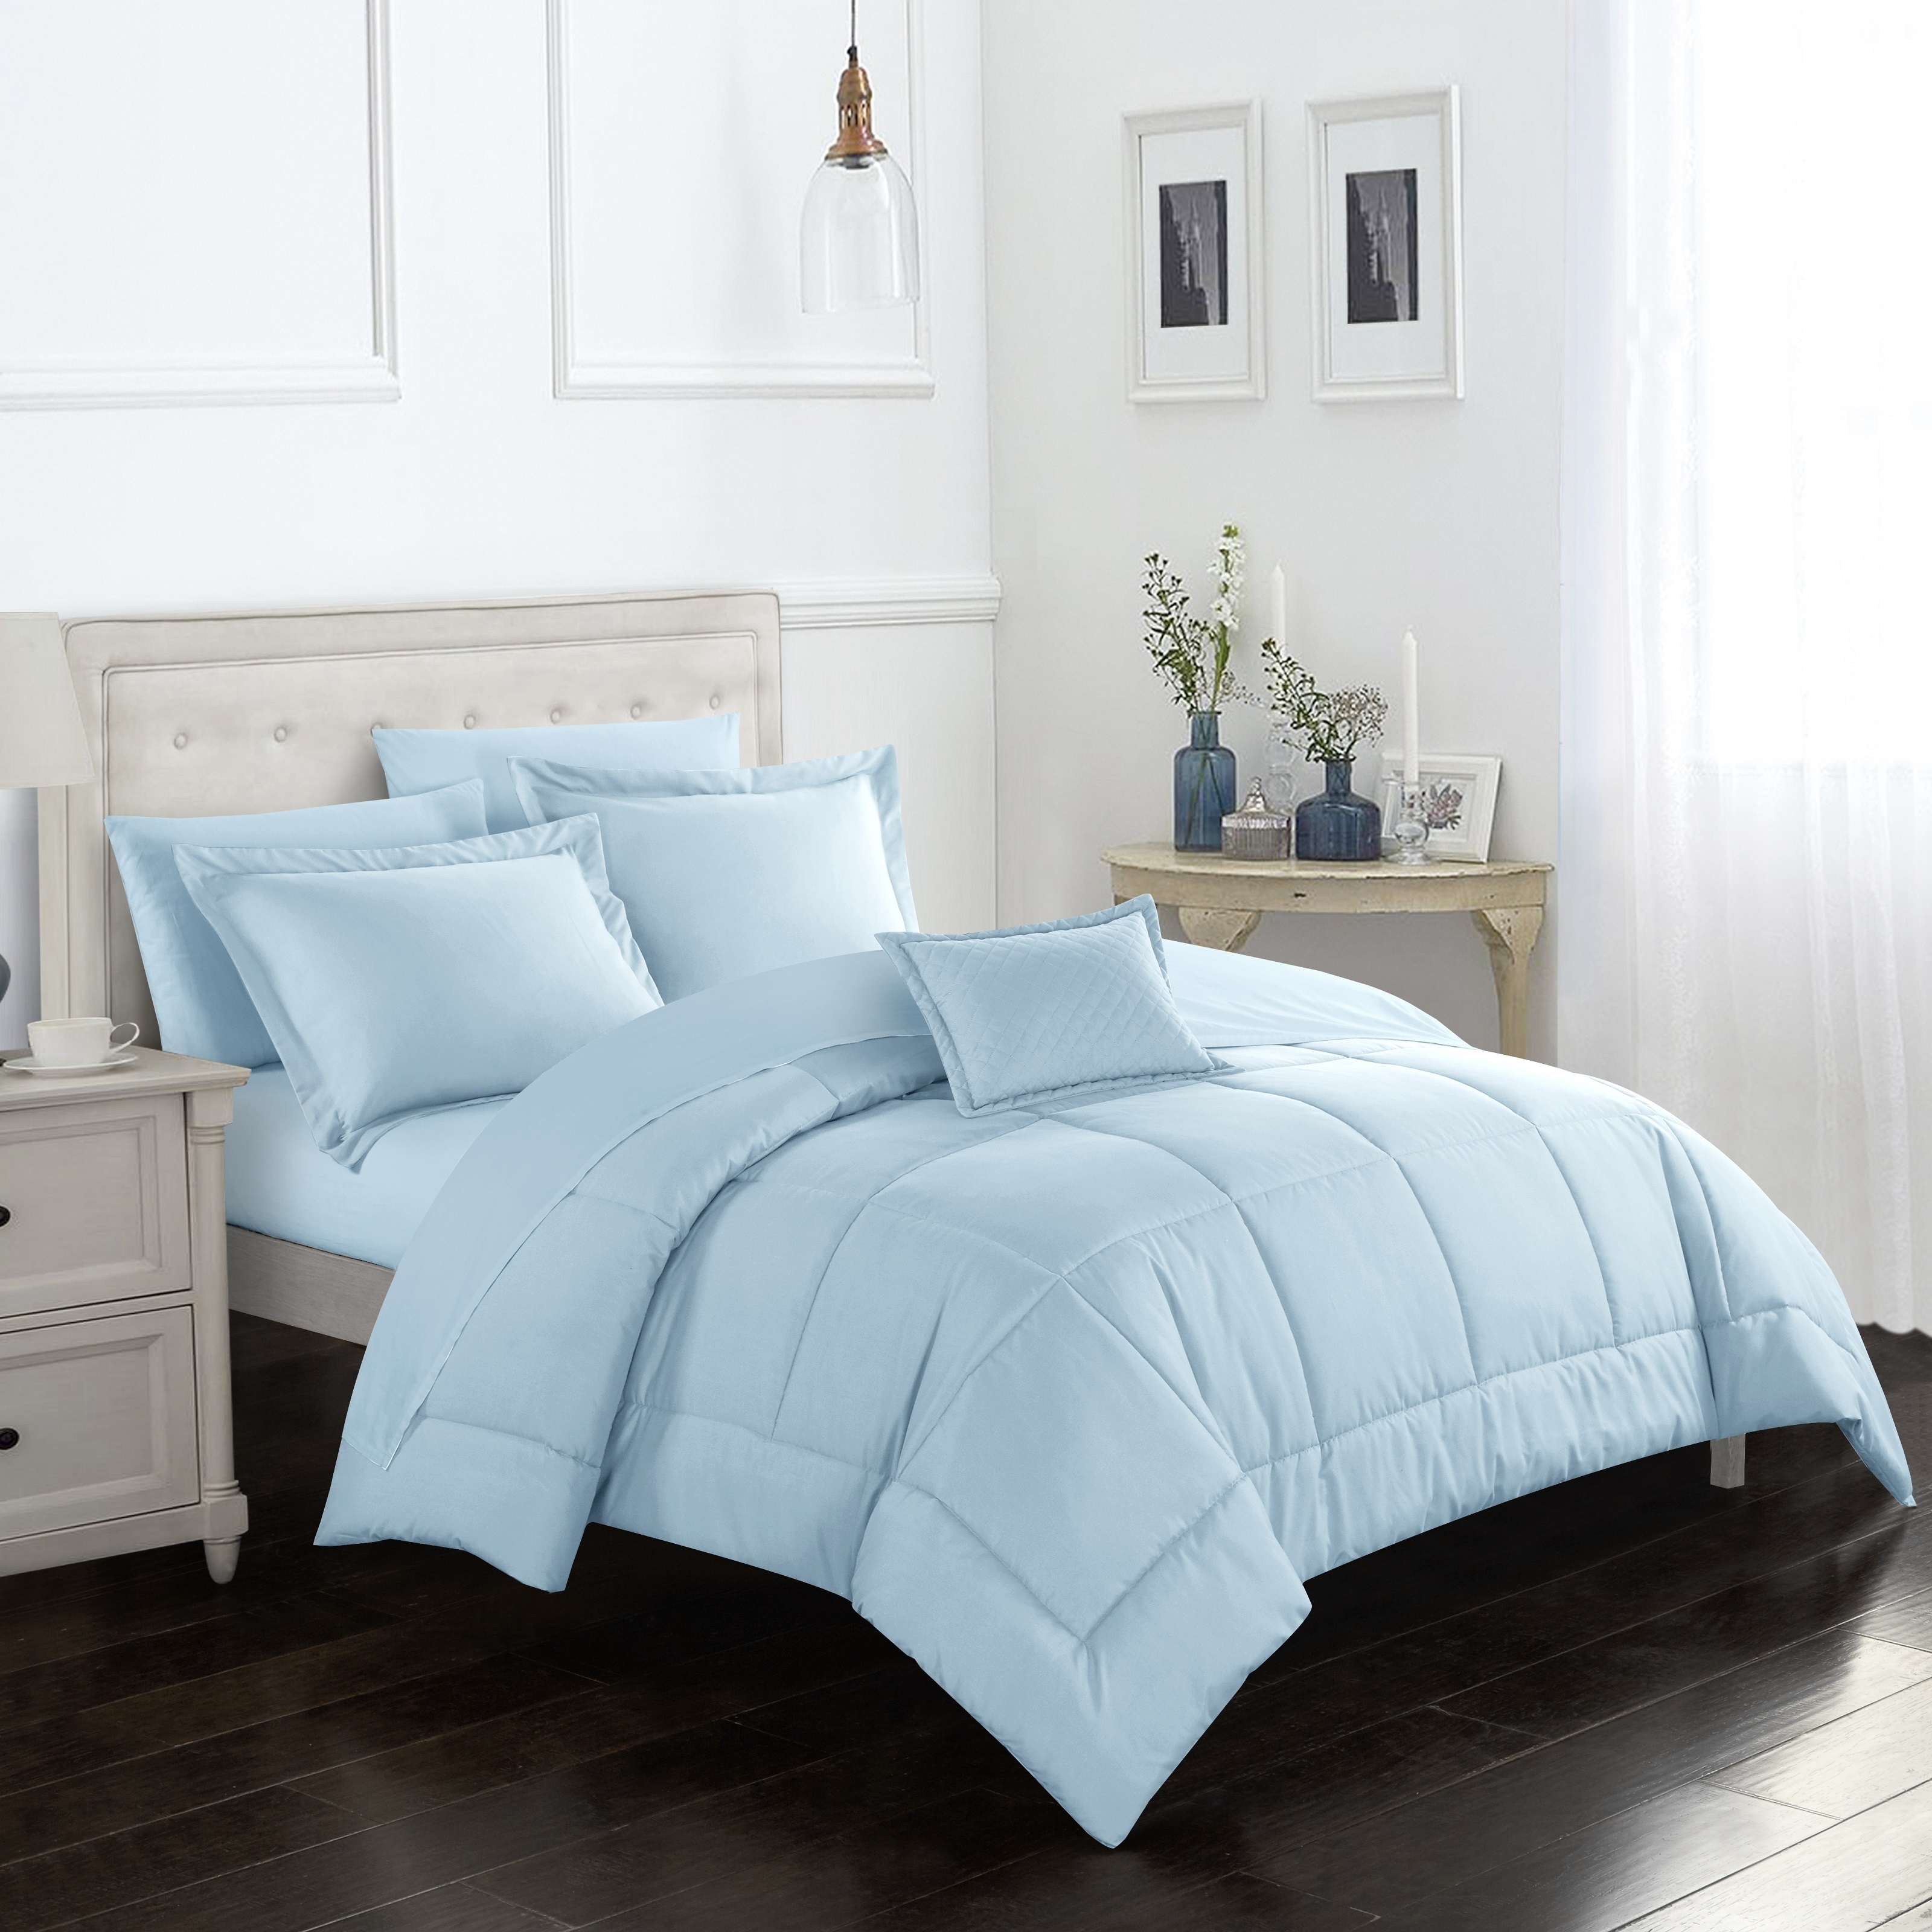 Joshuah 8 Or 6 Piece Comforter Set Pieced Solid Color Stitched With Sheet Set - Brick, Twin